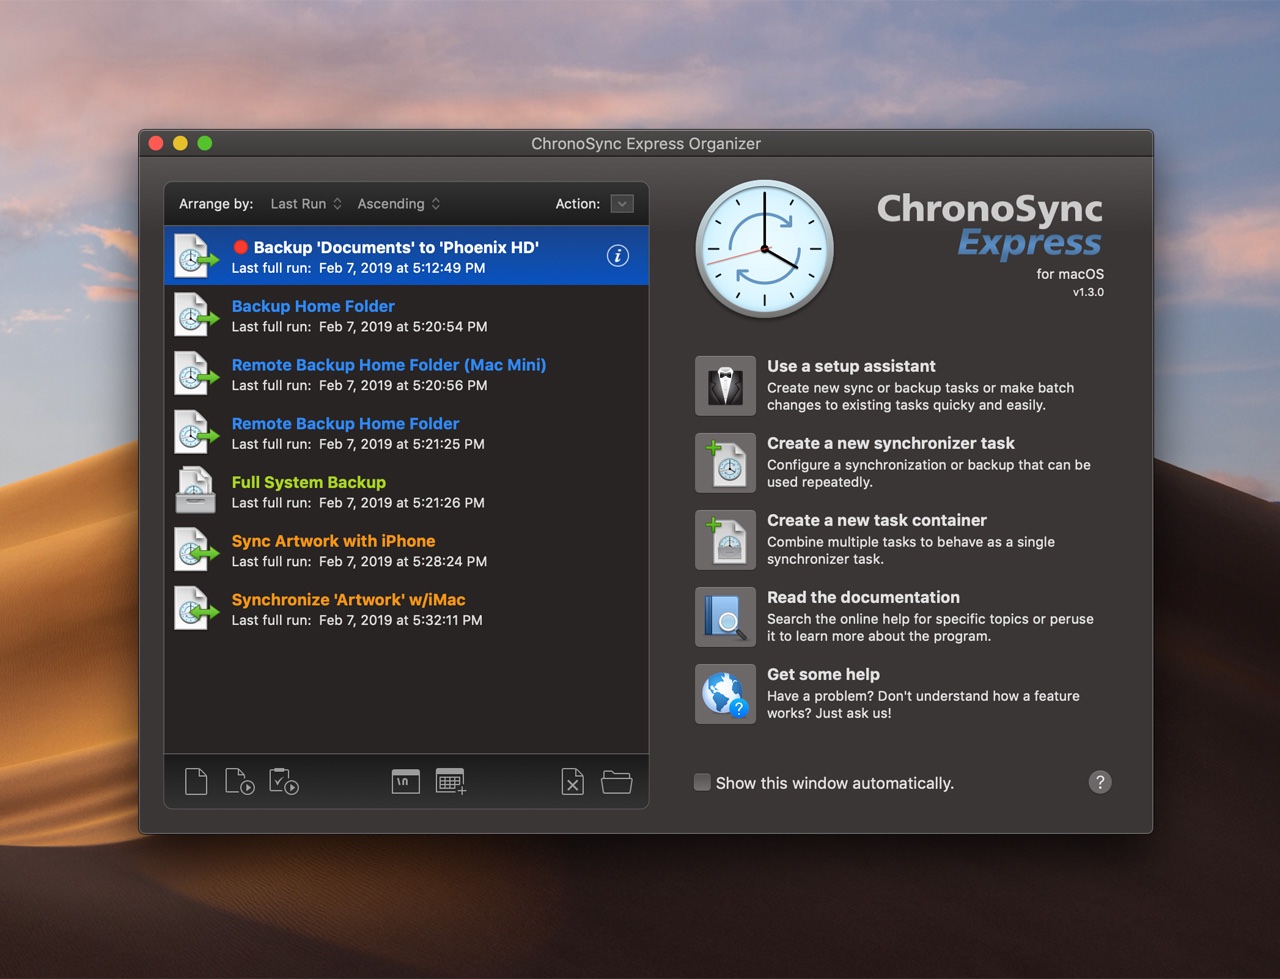 ChronoSync Express now supports macOS Mojave